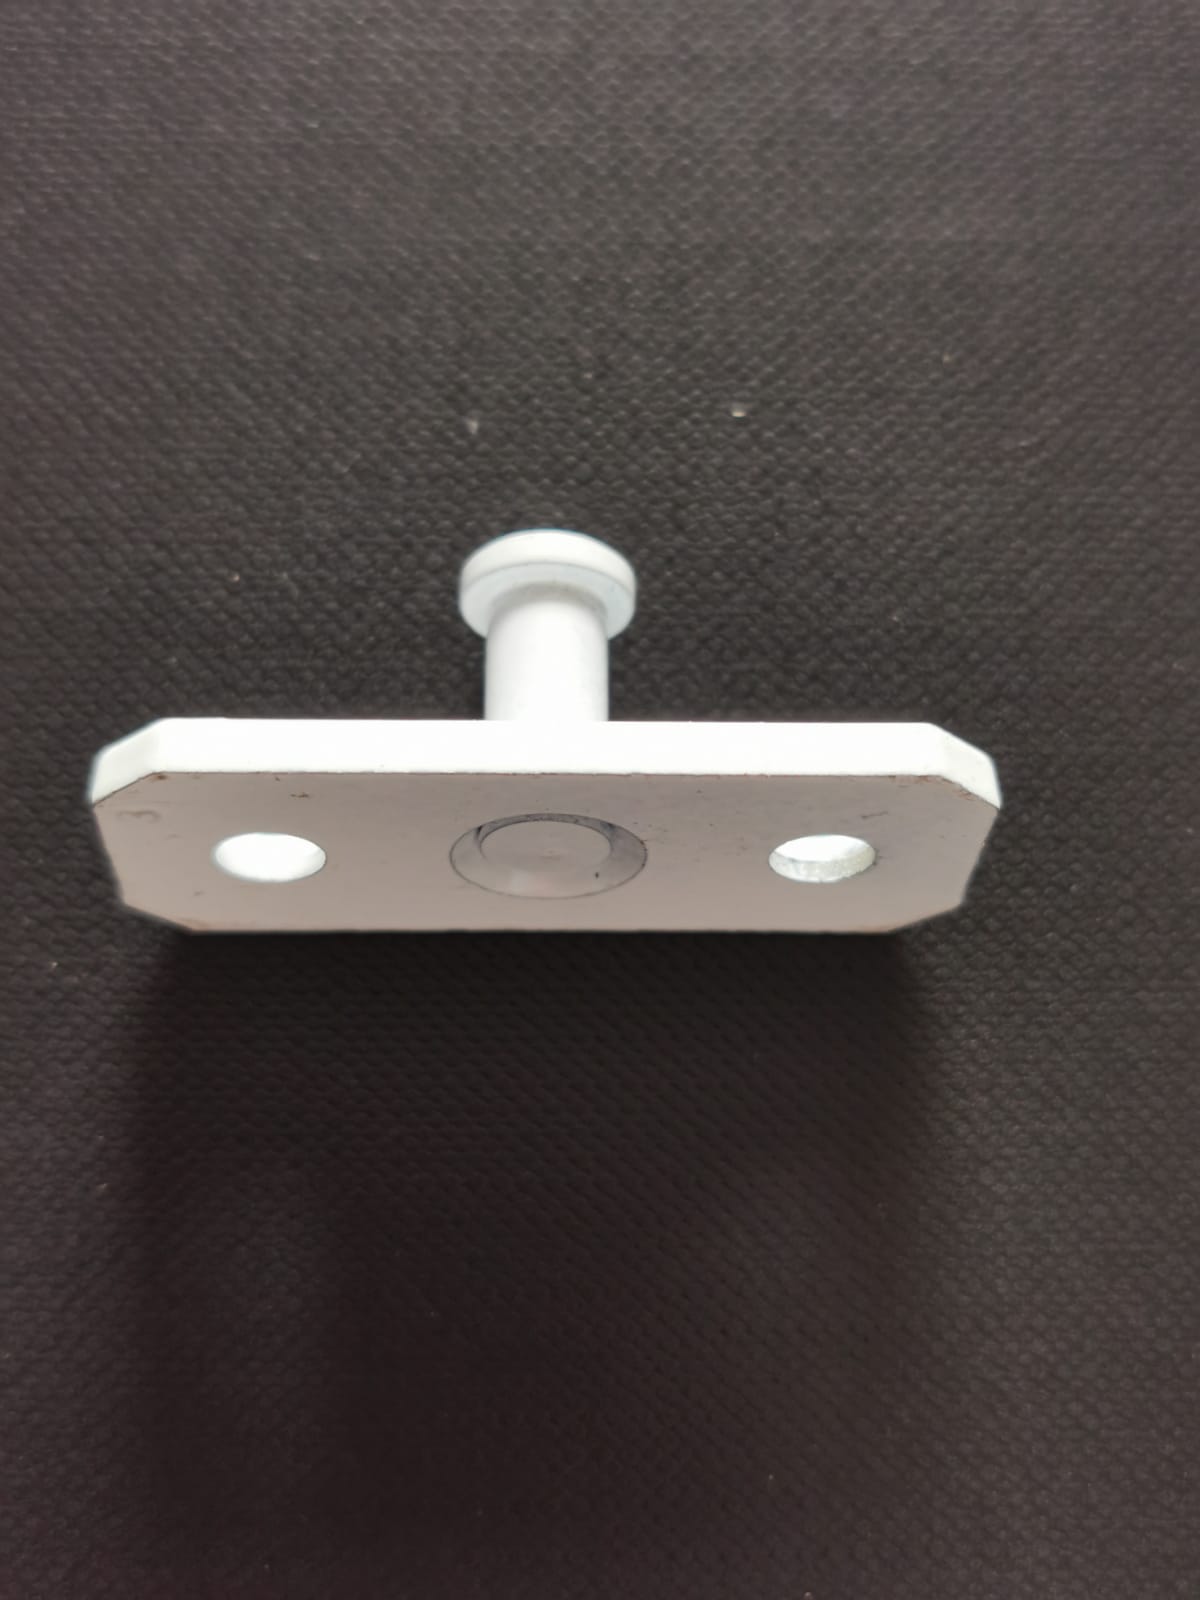 14mm high Stud to suit Window Restrictors, suits both left and right hand versions. Manufactured from stainless steel. Ideal For retro-fitting. Suits 17mm stack height hinged windows.